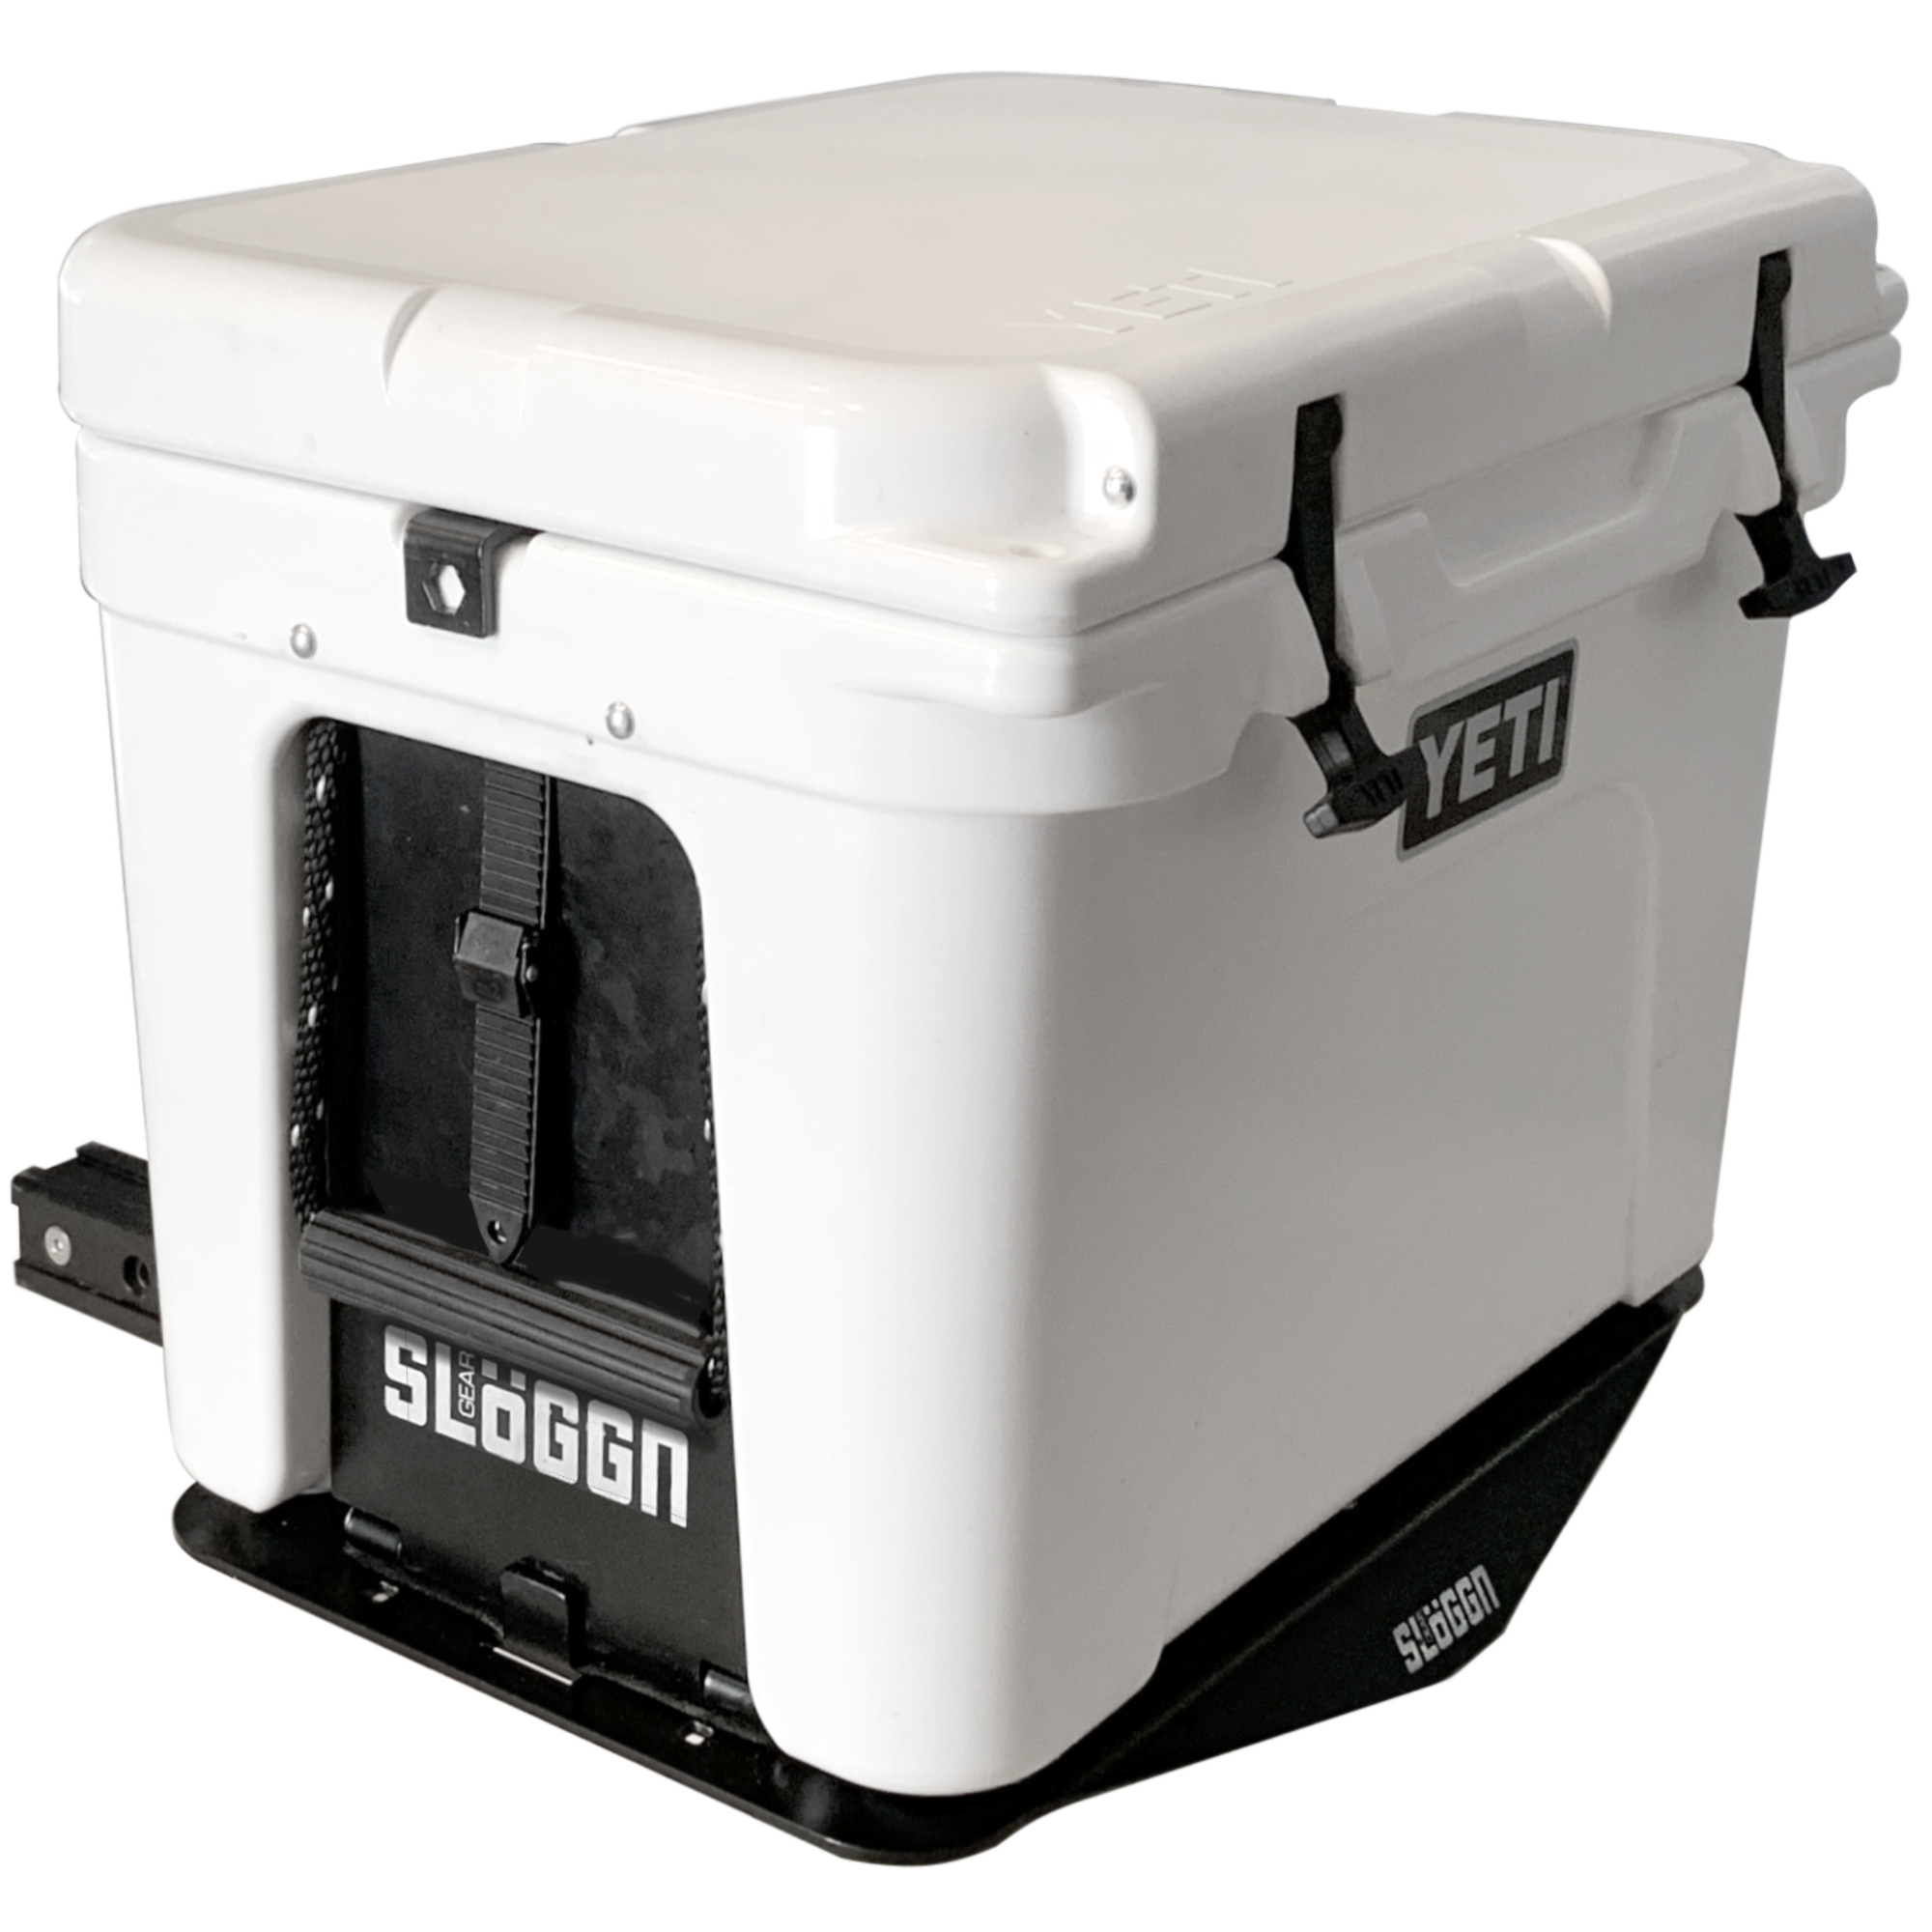 Sloggn Gear Company, Hitch Mount YETI Cooler Carrier, Capacity 300 lb, Receiver Size 2 in, Material Carbon Steel, Model 58945